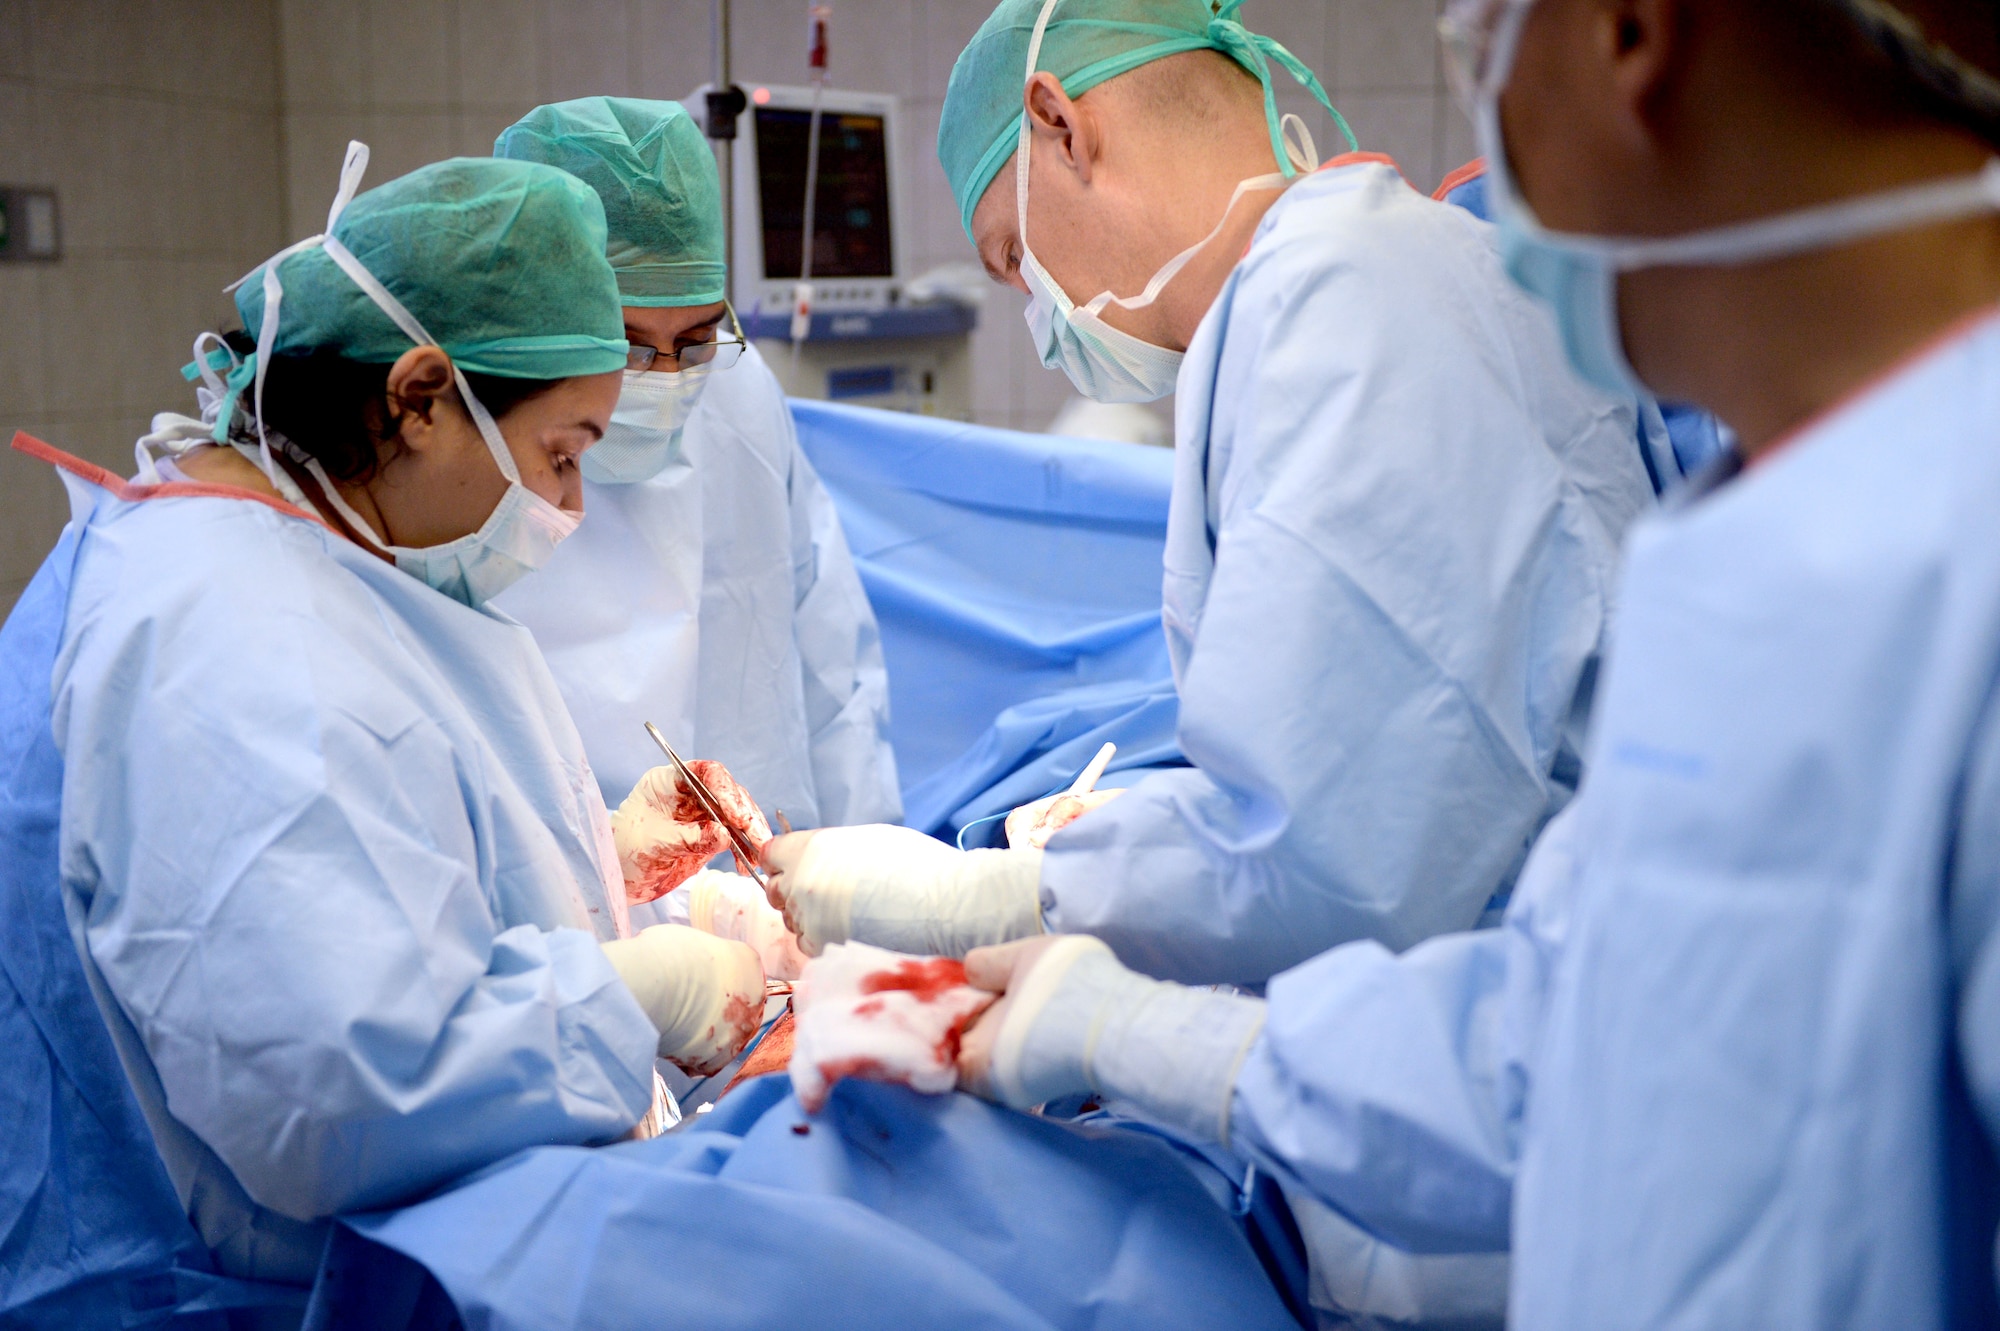 U.S. Air Force medical personnel work hand in hand with Honduran doctors to perform an emergency surgical procedure on a Honduran Army soldier with the 15th Battalion at the Dr. Salvador Paredes Hospital, August 10, 2015. The Honduran solider was one of 13 involved in an explosion at his base. The medical personnel are in Honduras as part of the New Horizons Honduras 2015 training exercise. 

New Horizons was launched in the 1980s and is an annual joint humanitarian assistance exercise that U.S. Southern Command conducts with a partner nation in Central America, South America or the Caribbean. The exercise improves joint training readiness of U.S. and partner nation civil engineers, medical professionals and support personnel through humanitarian assistance activities.

(U.S. Air Force photo by Capt. David J. Murphy/Released)